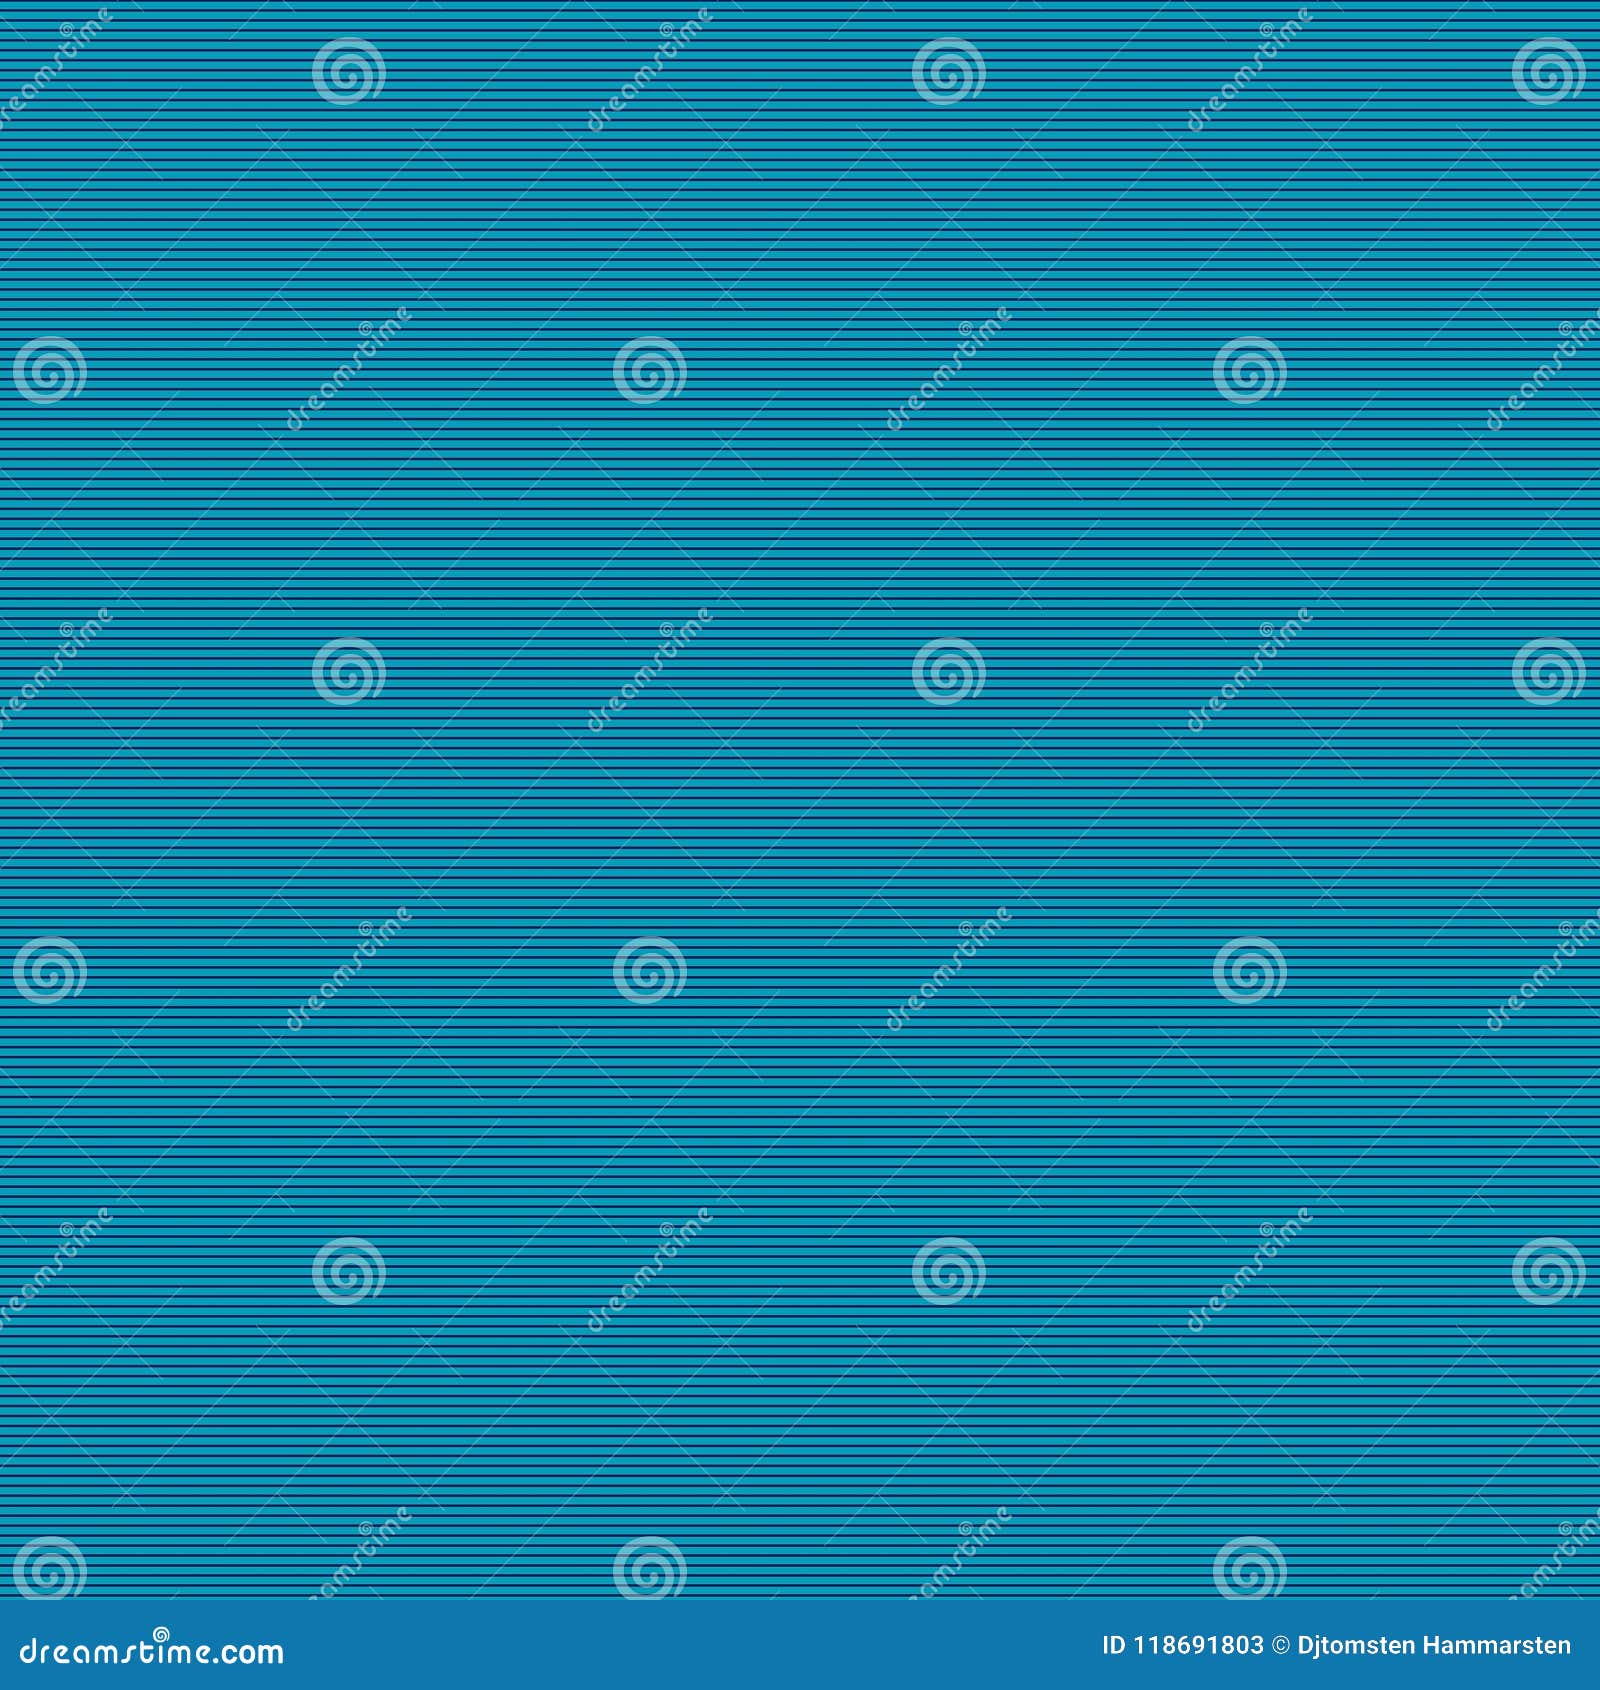 Retro Backgrounds and Wallpaper in Mixt Colors and Pattern Stock ...